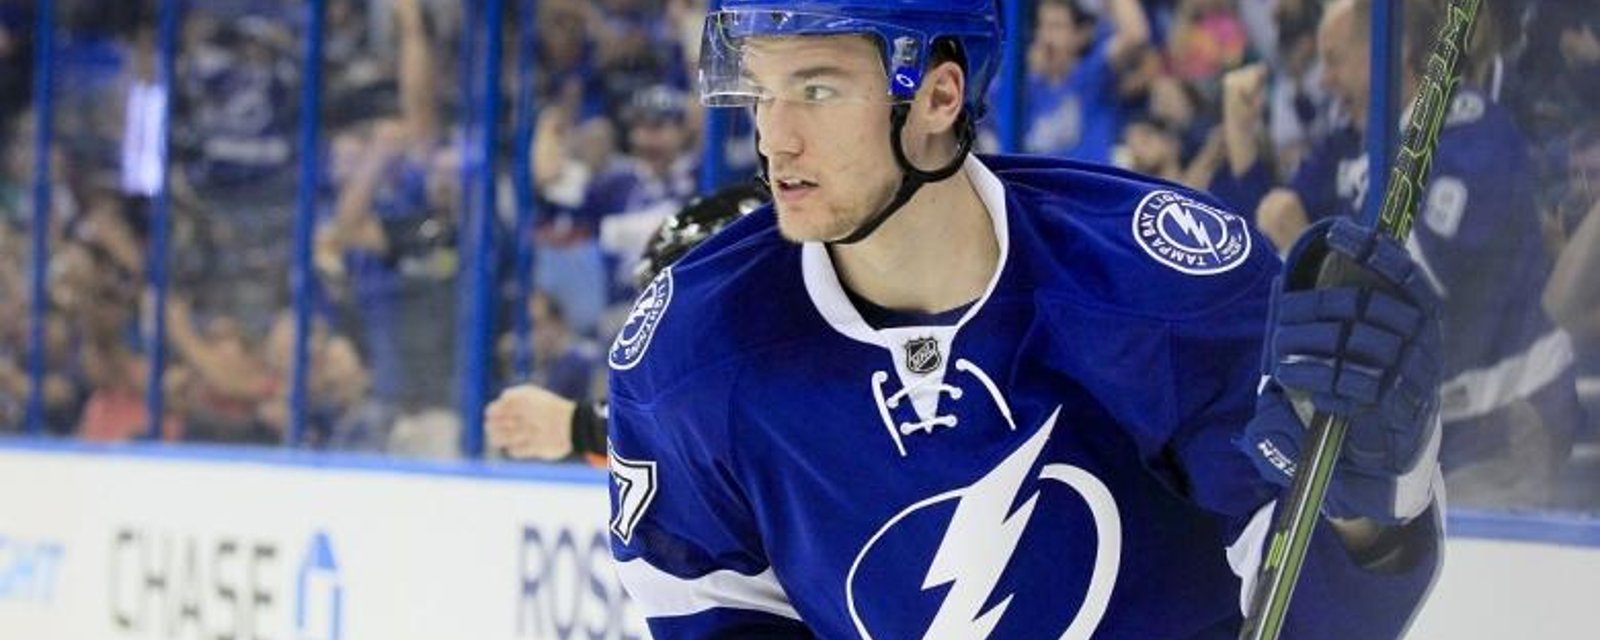 Breaking: Scouts from 5 teams in Syracuse as Drouin trade talks heat up.